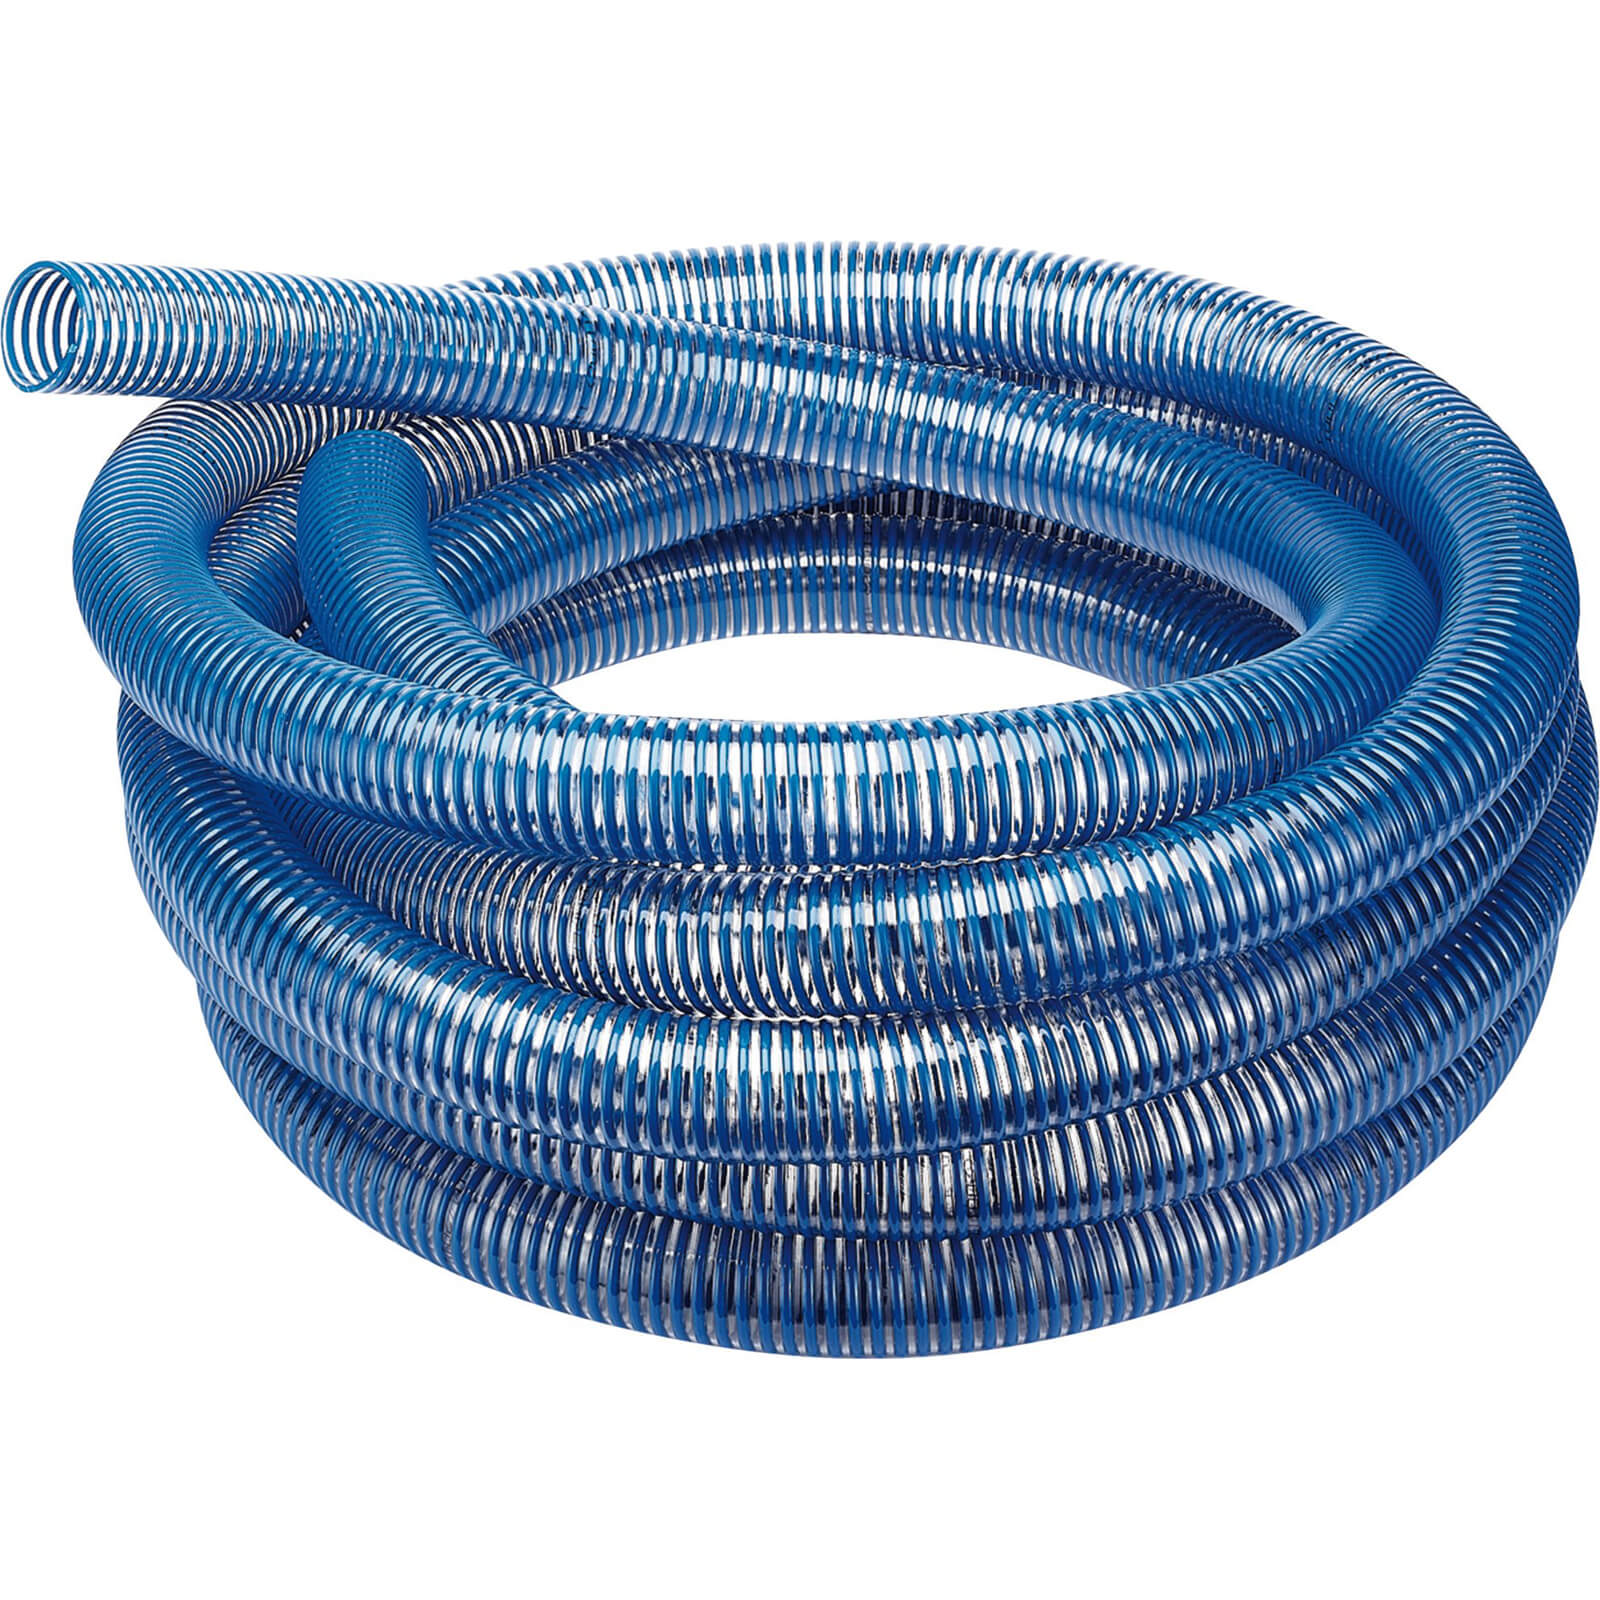 Image of Draper Solid Wall PVC Suction Hose 50mm 10m